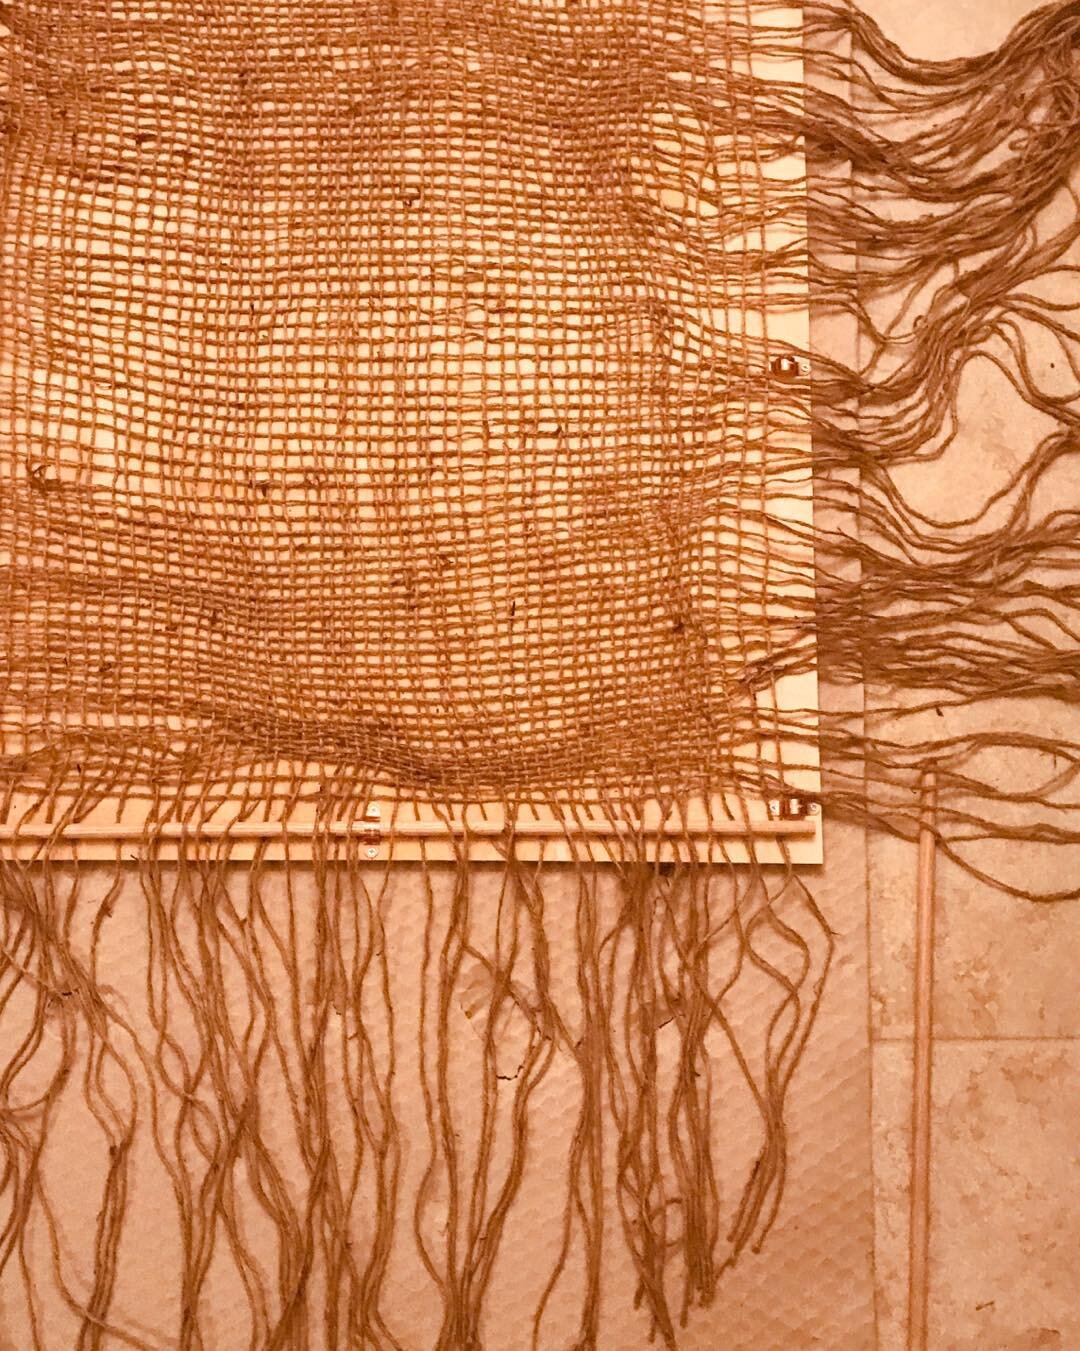 Weaving work-in-progress made from jute rope and pine. The final project is inspired by a weaving my daughter did. #austinart #austinartist #weaving #littlefriday